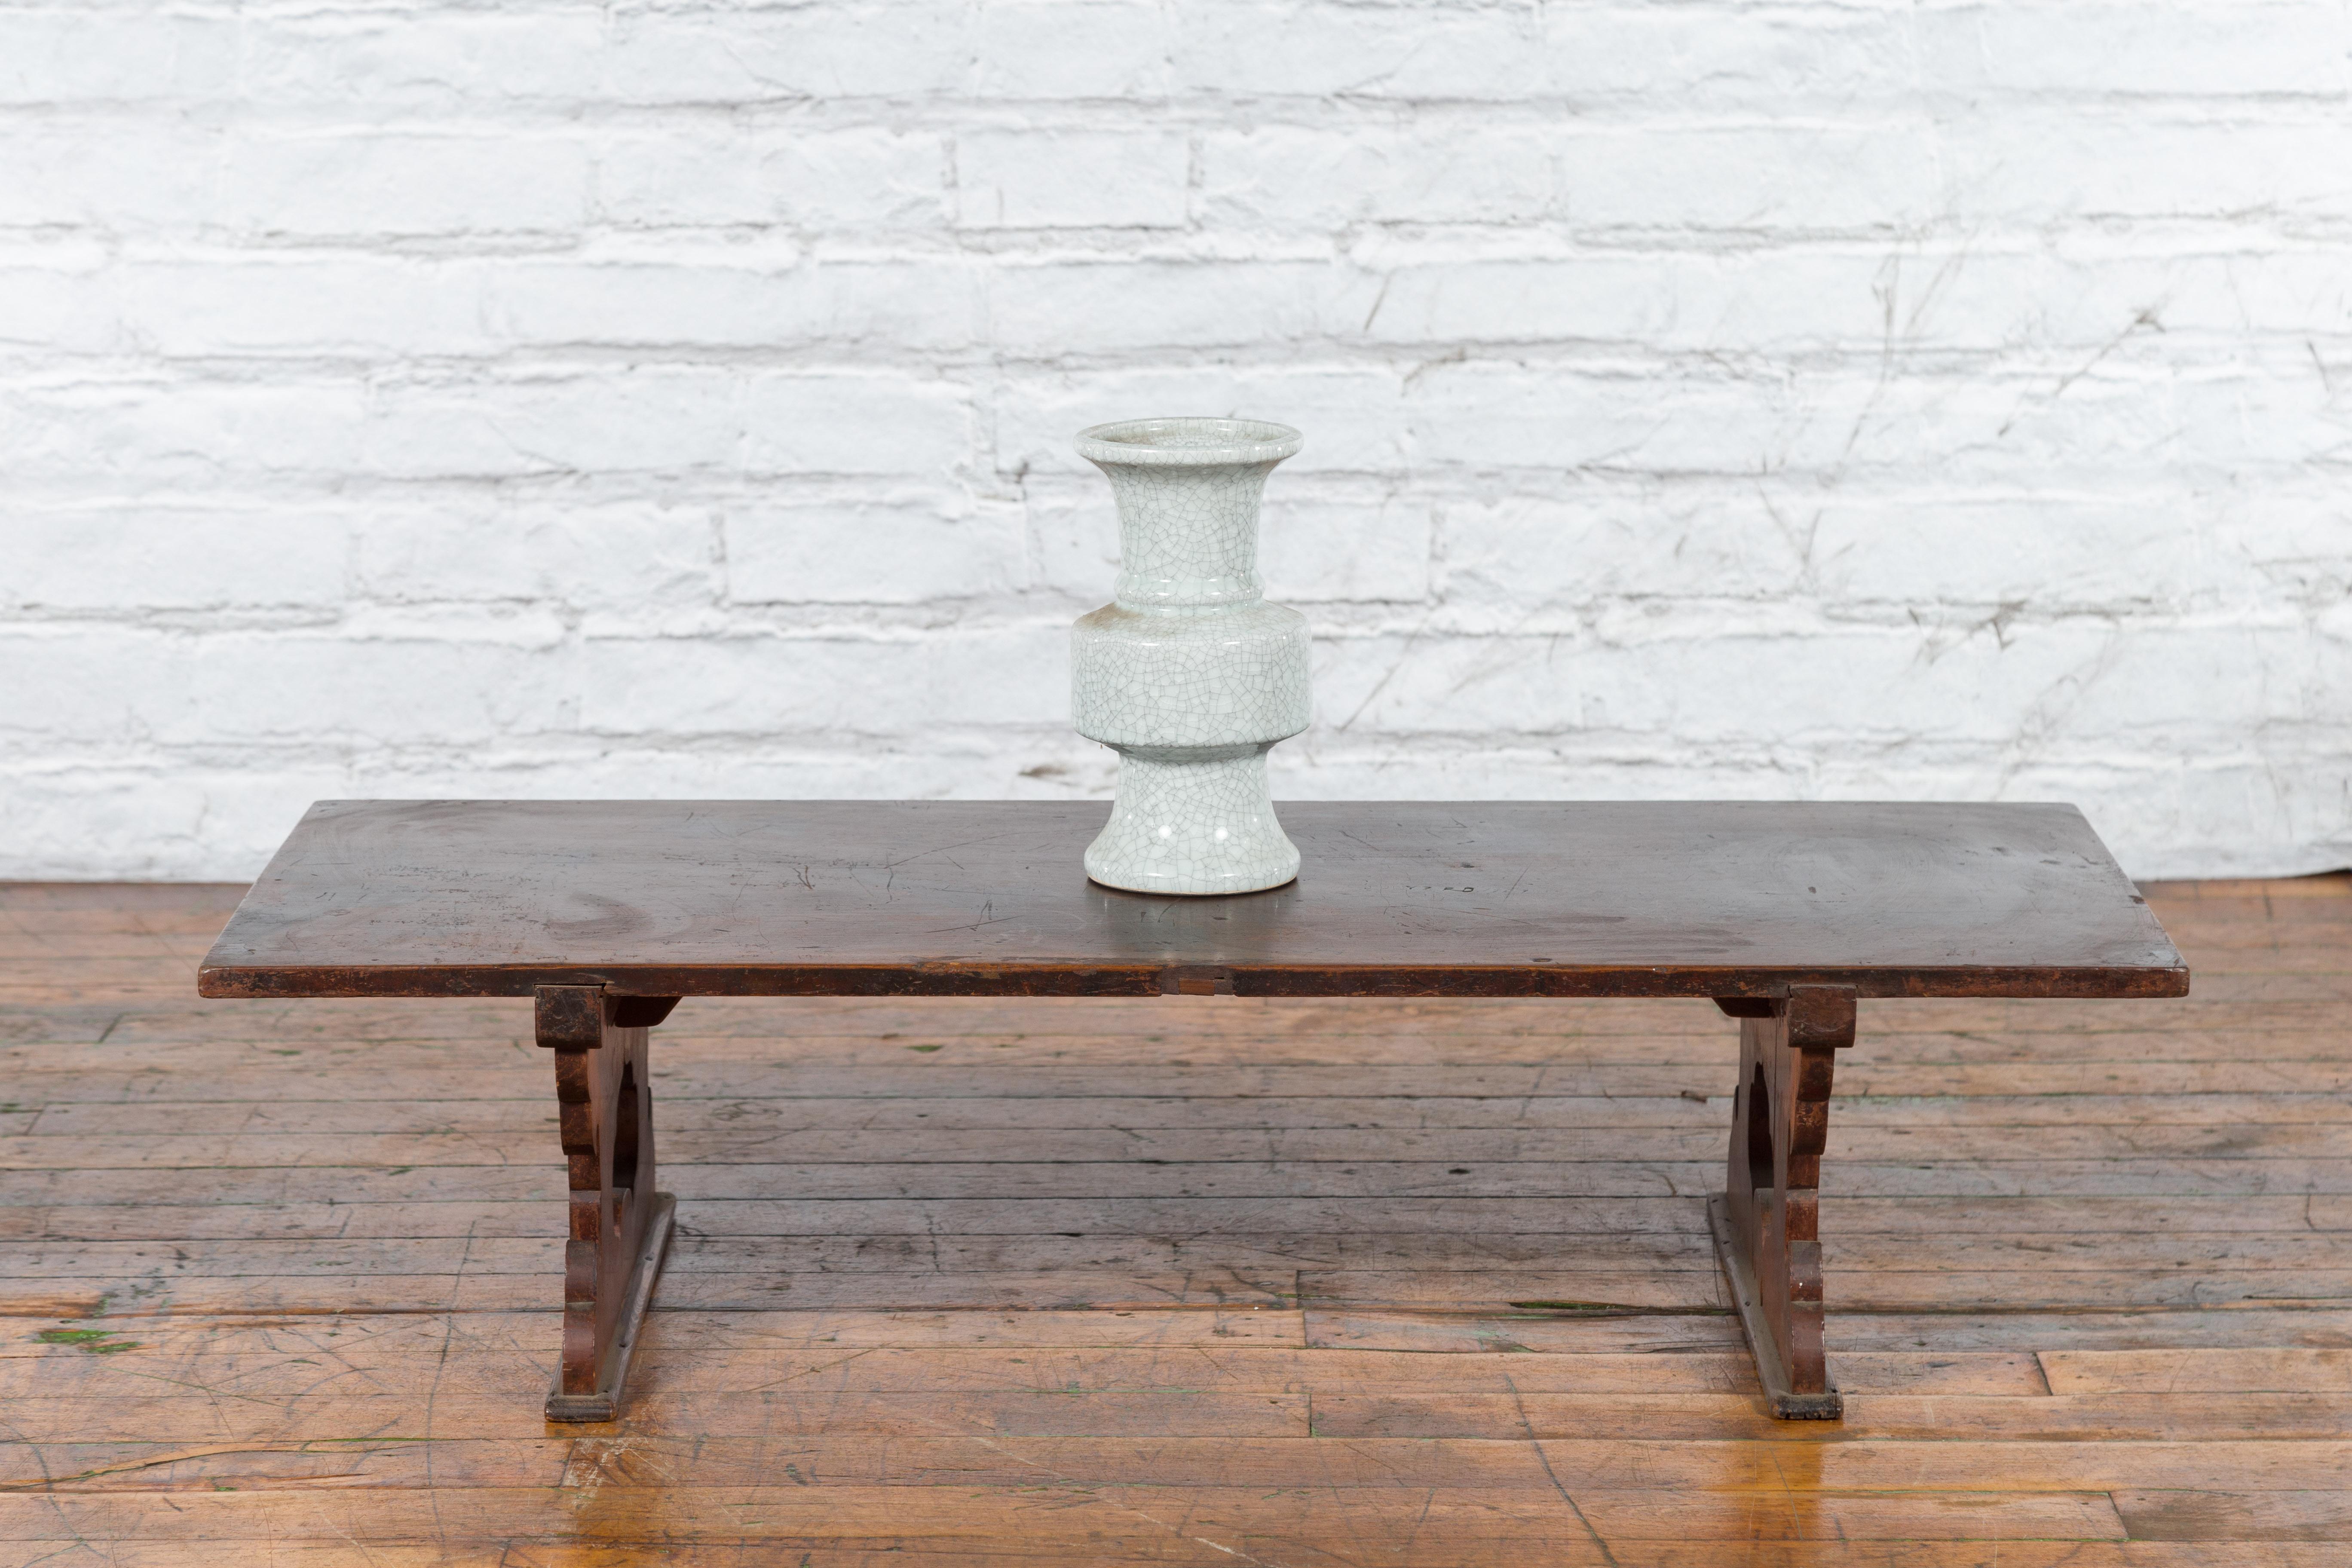 20th Century Japanese Meiji Period Low Table with Recessed Legs and Open Carved Cutout Legs For Sale